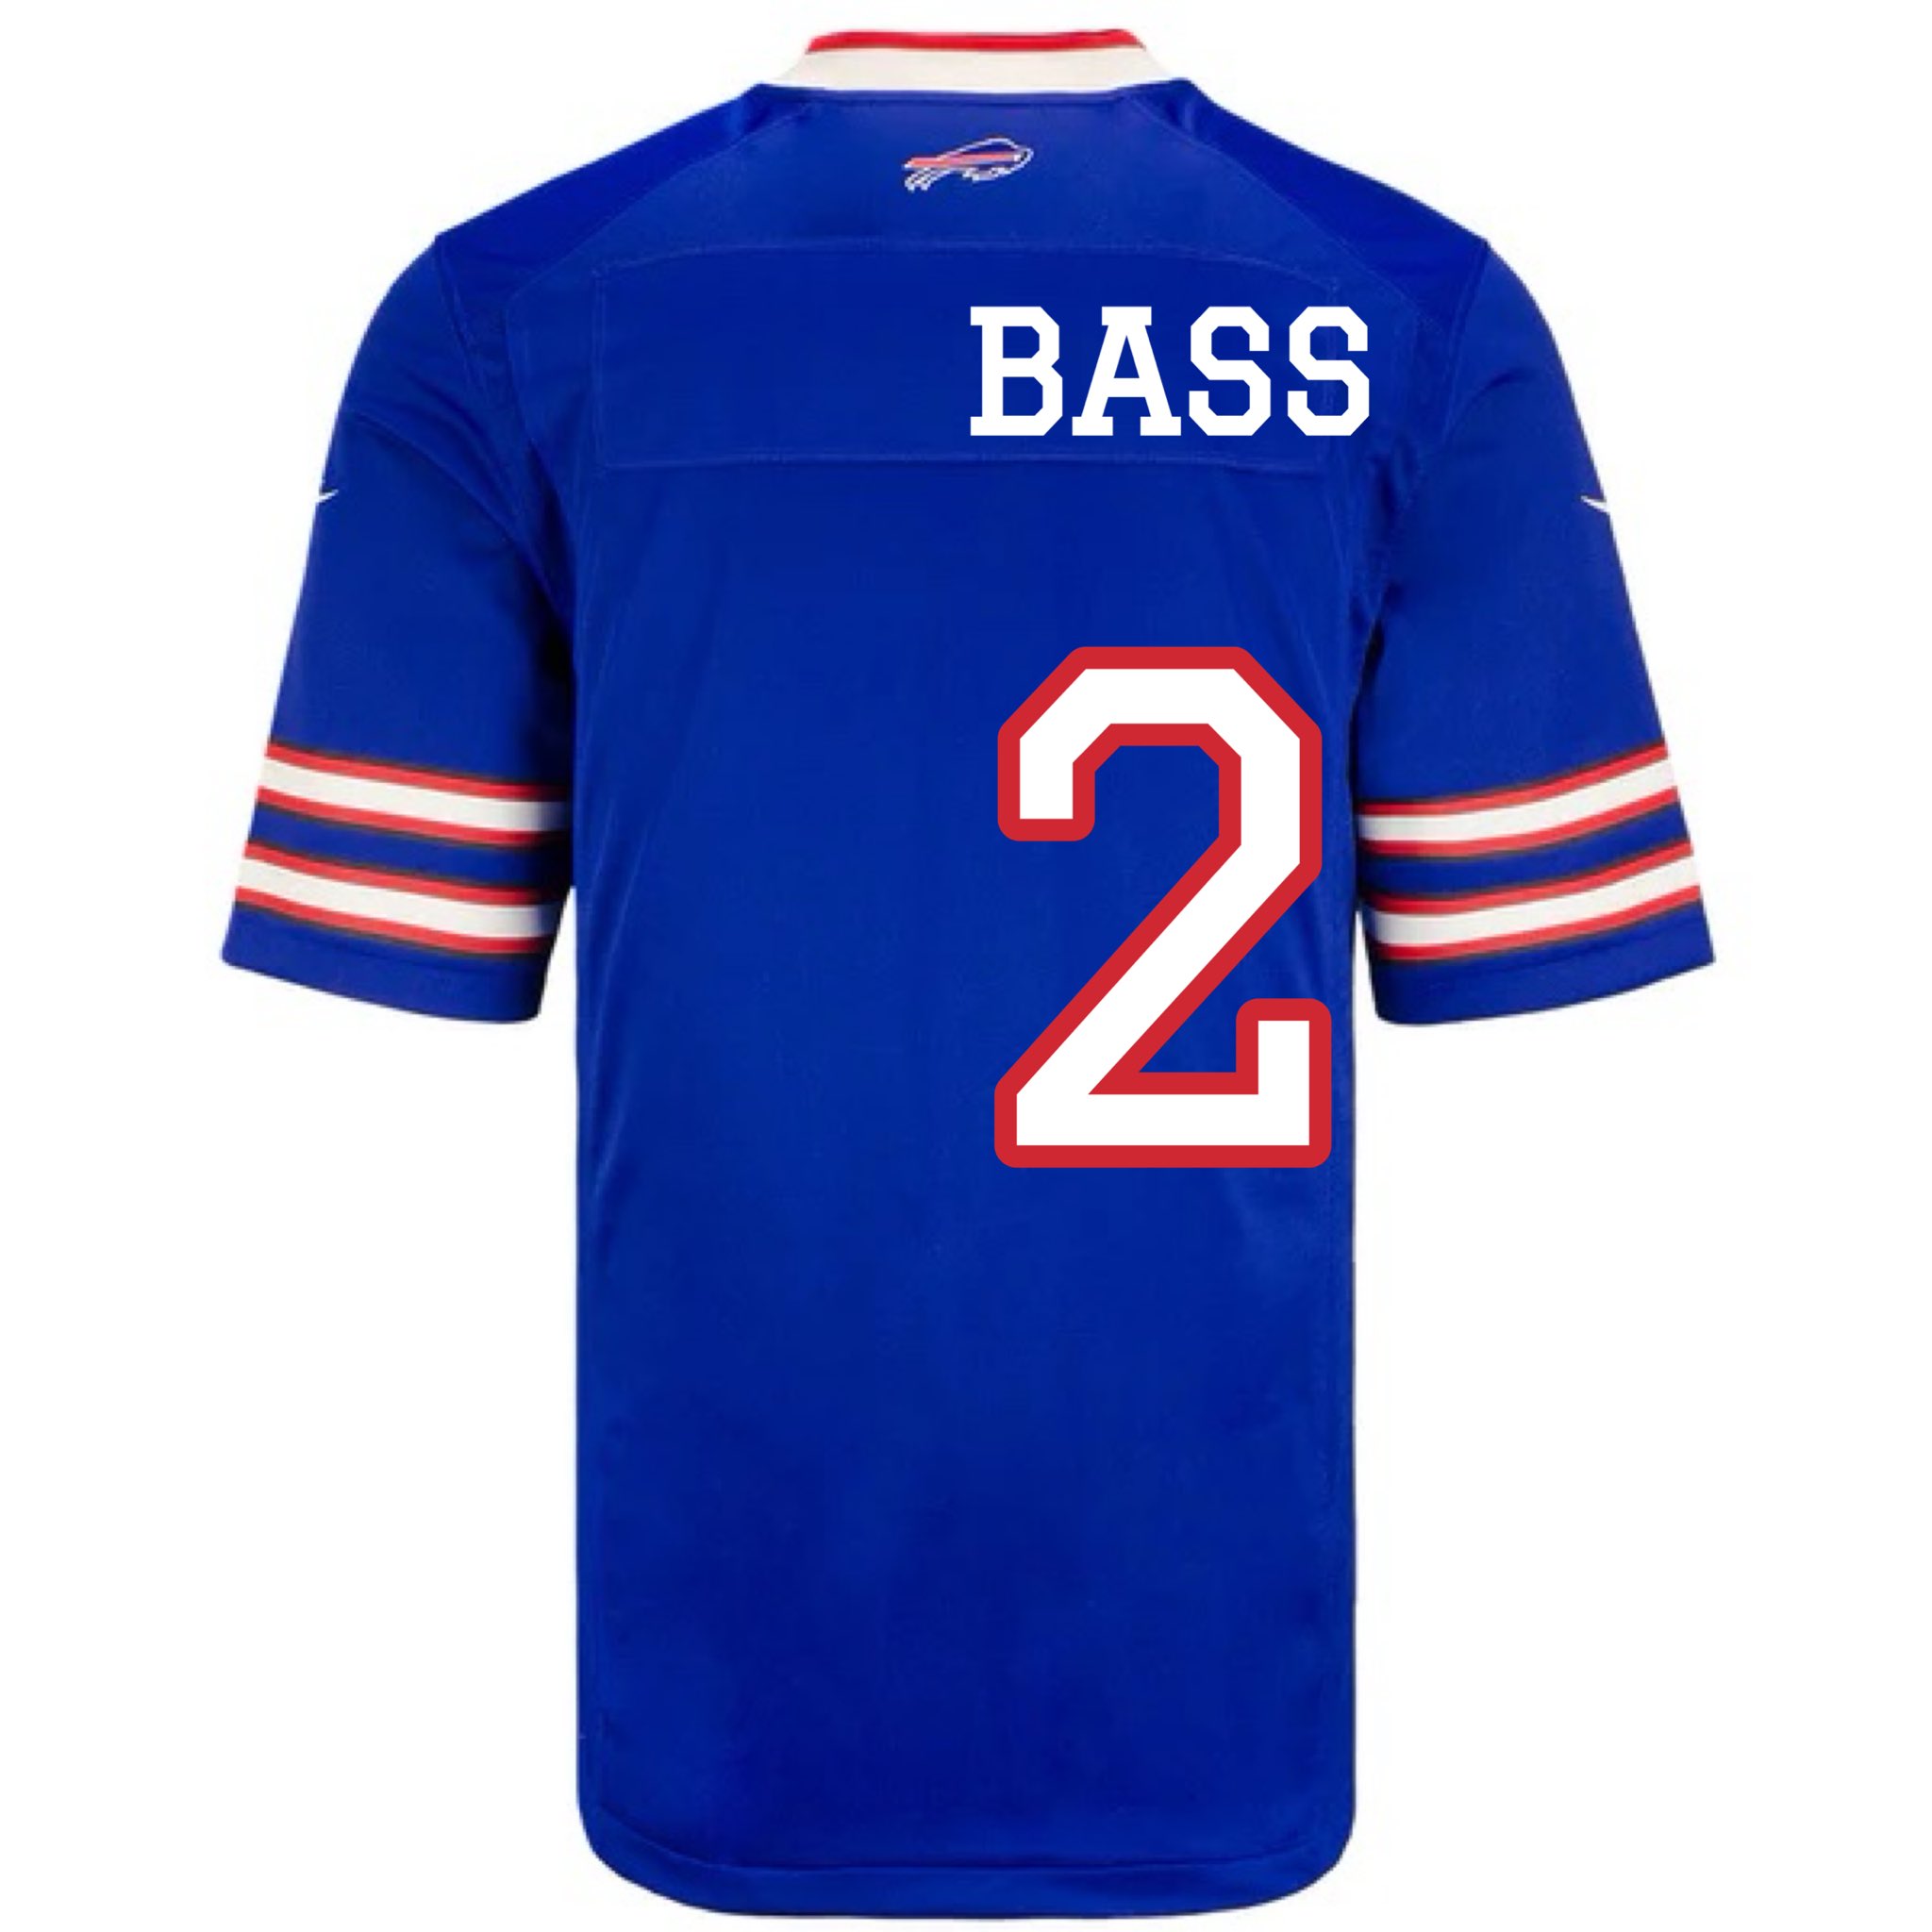 Bussin' With The Boys on X: The new “Wide Right” edition Bills jerseys now  available in the team store:  / X